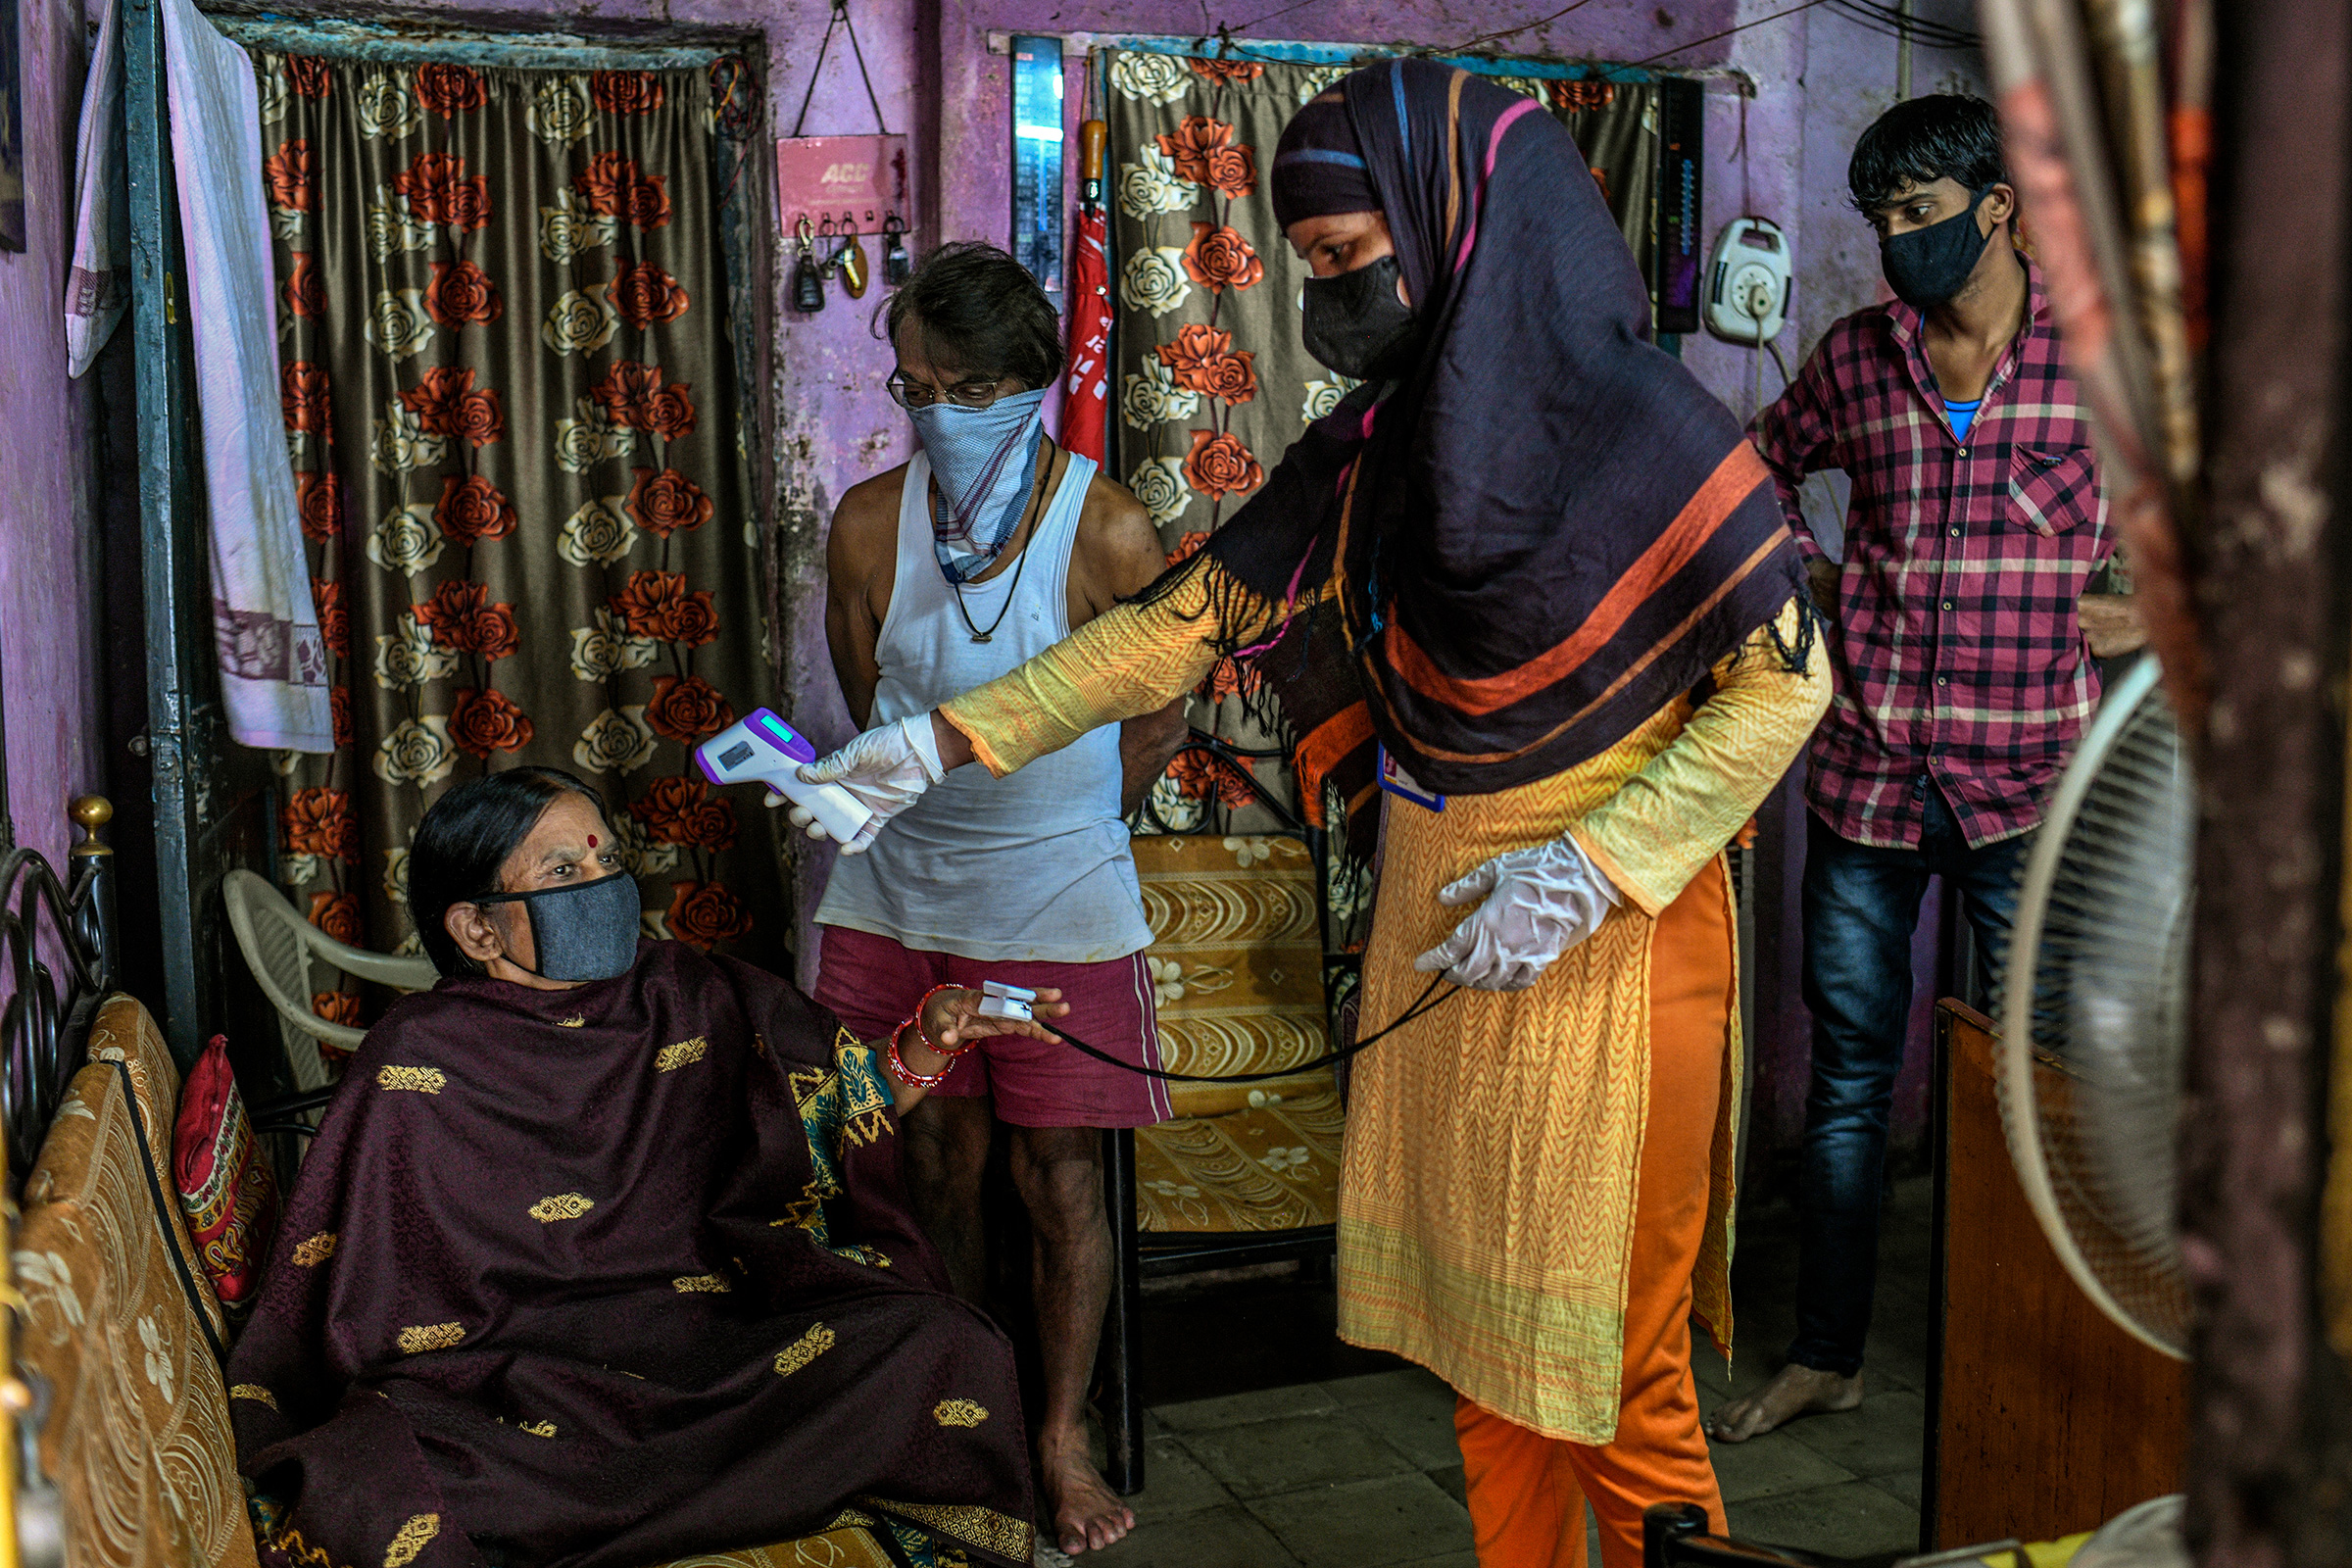 A health care worker checks a woman's temperature and oxygen saturation in the Dhole Patil slum of Pune, India, on Aug. 10, 2020.